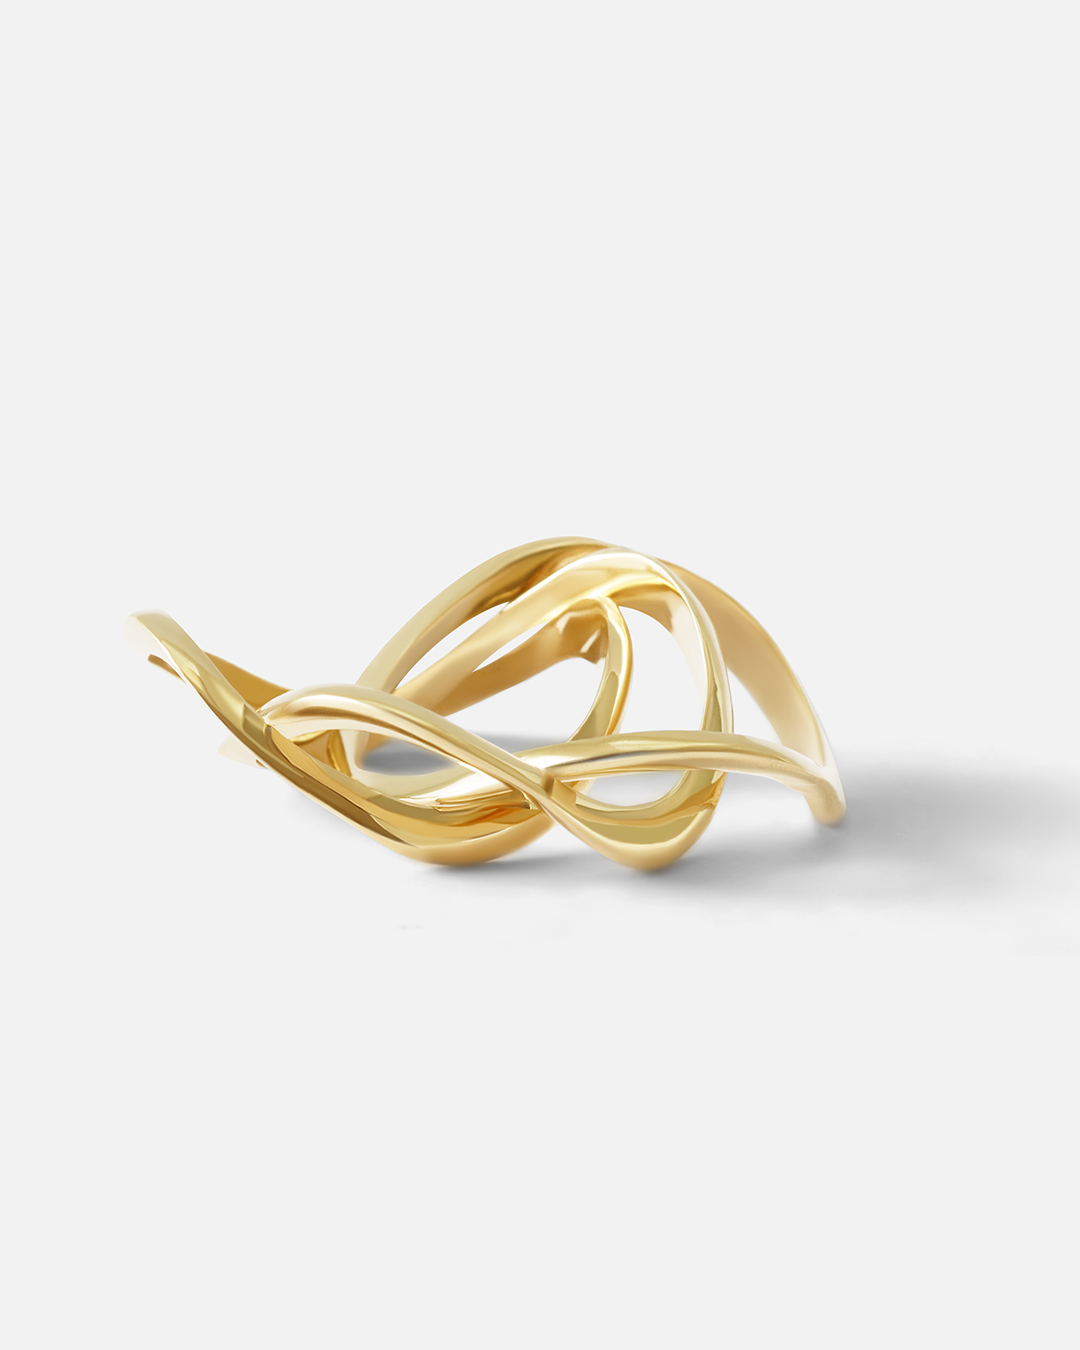 Twist Stack Rings By Lucia B Marti in rings Category